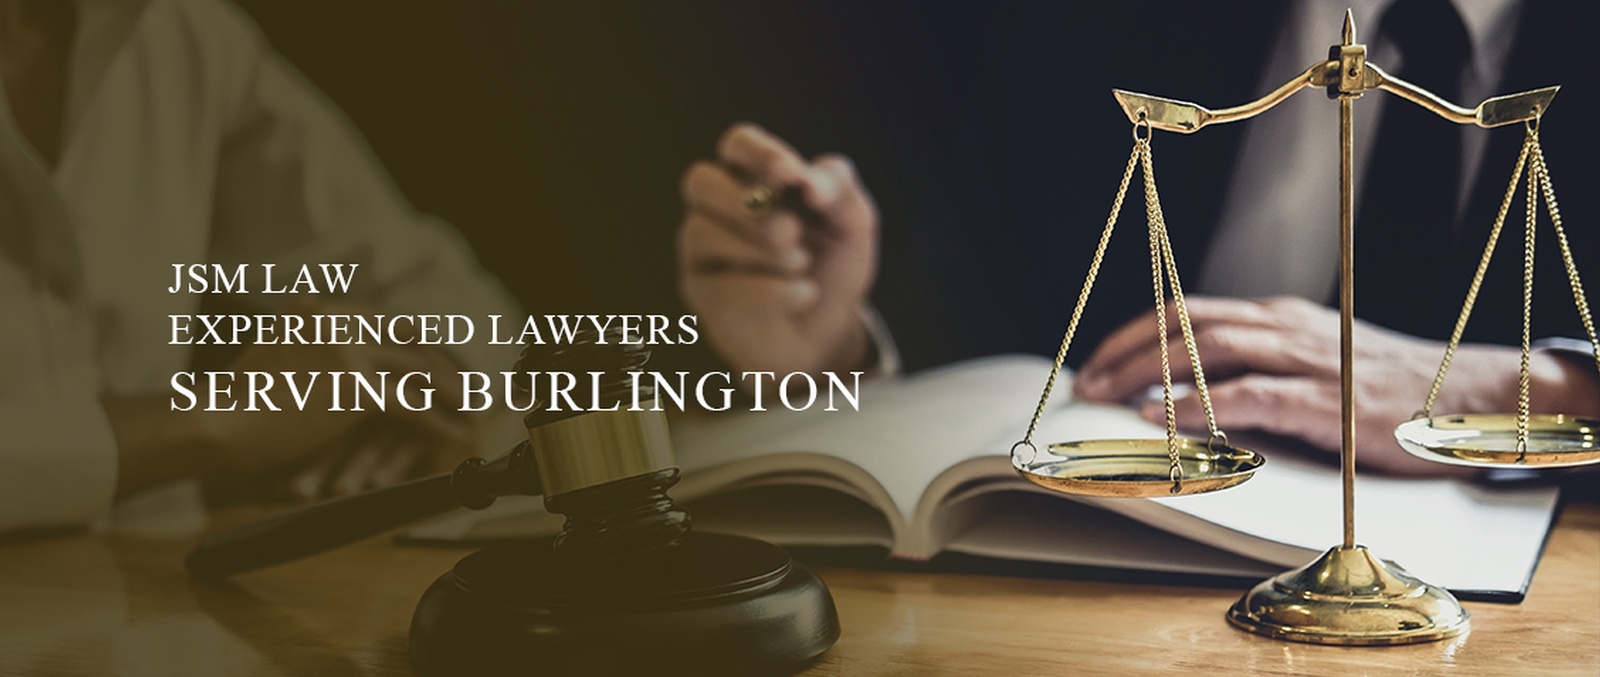 CORPORATE, CRIMINAL AND PERSONAL INJURY LAWYERS BURLINGTON ON